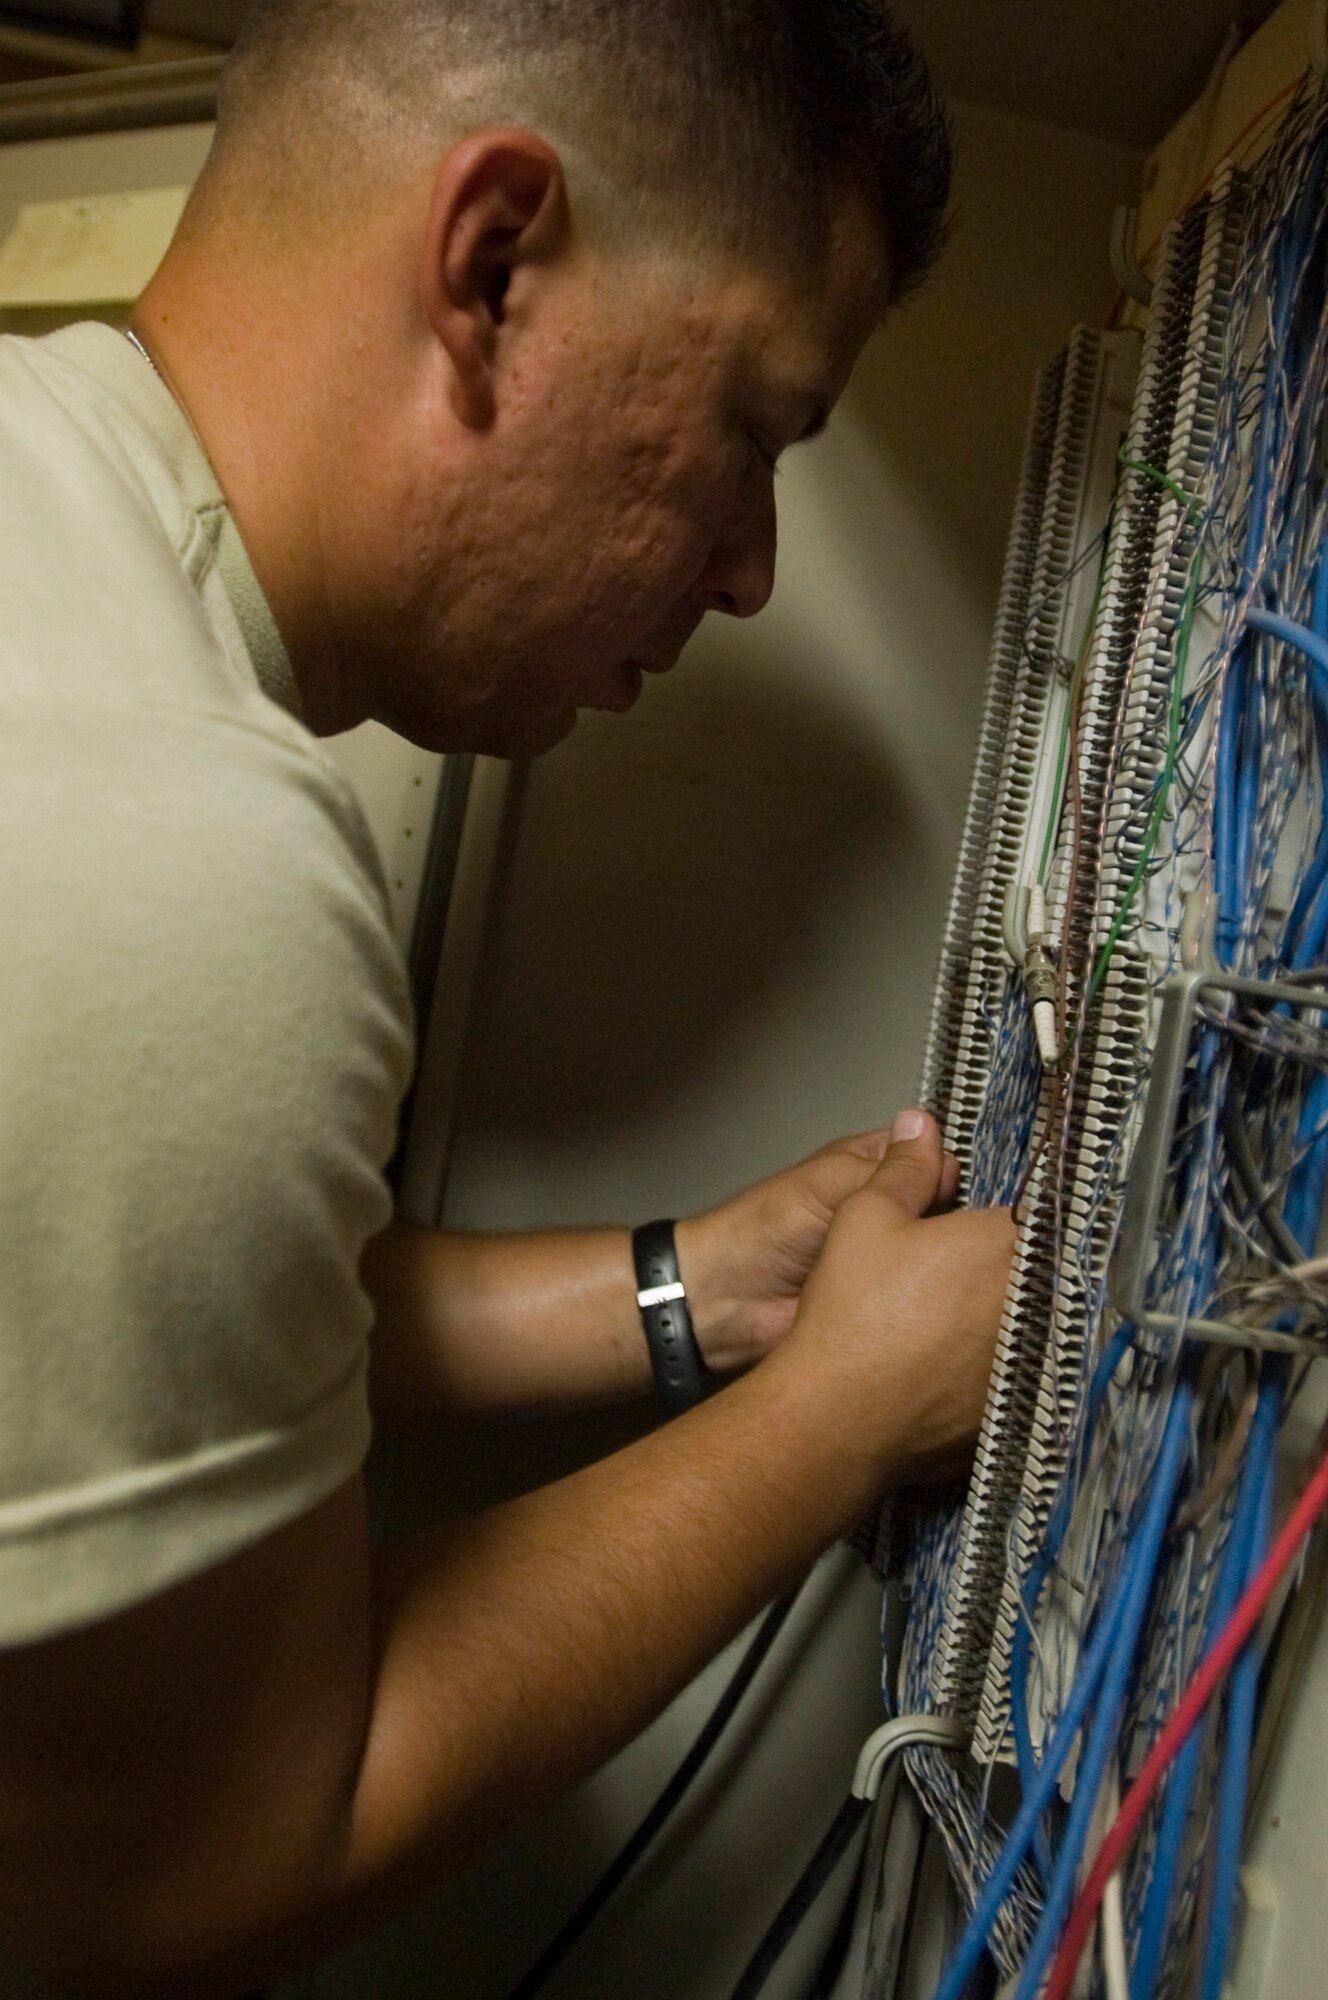 ALI BASE, Iraq -- Staff Sgt. Javiel Ladines, 407th Expeditionary Communications Squadron network technician, separates wires that will be inserted into a cross connector enabling a phone connection Aug. 8, 2008. The 407th ECS "Wire Dogs" installed fiber optics inside a new building that the Navy will use. By installing the fiber optics, they are giving telephone and Internet connections to the Navy which enables them to continue their mission during transitions. Sergeant Ladines is deployed from Tinker Air Force Base, Okla. (U.S. Air Force photo/Airman 1st Class Christopher Griffin)